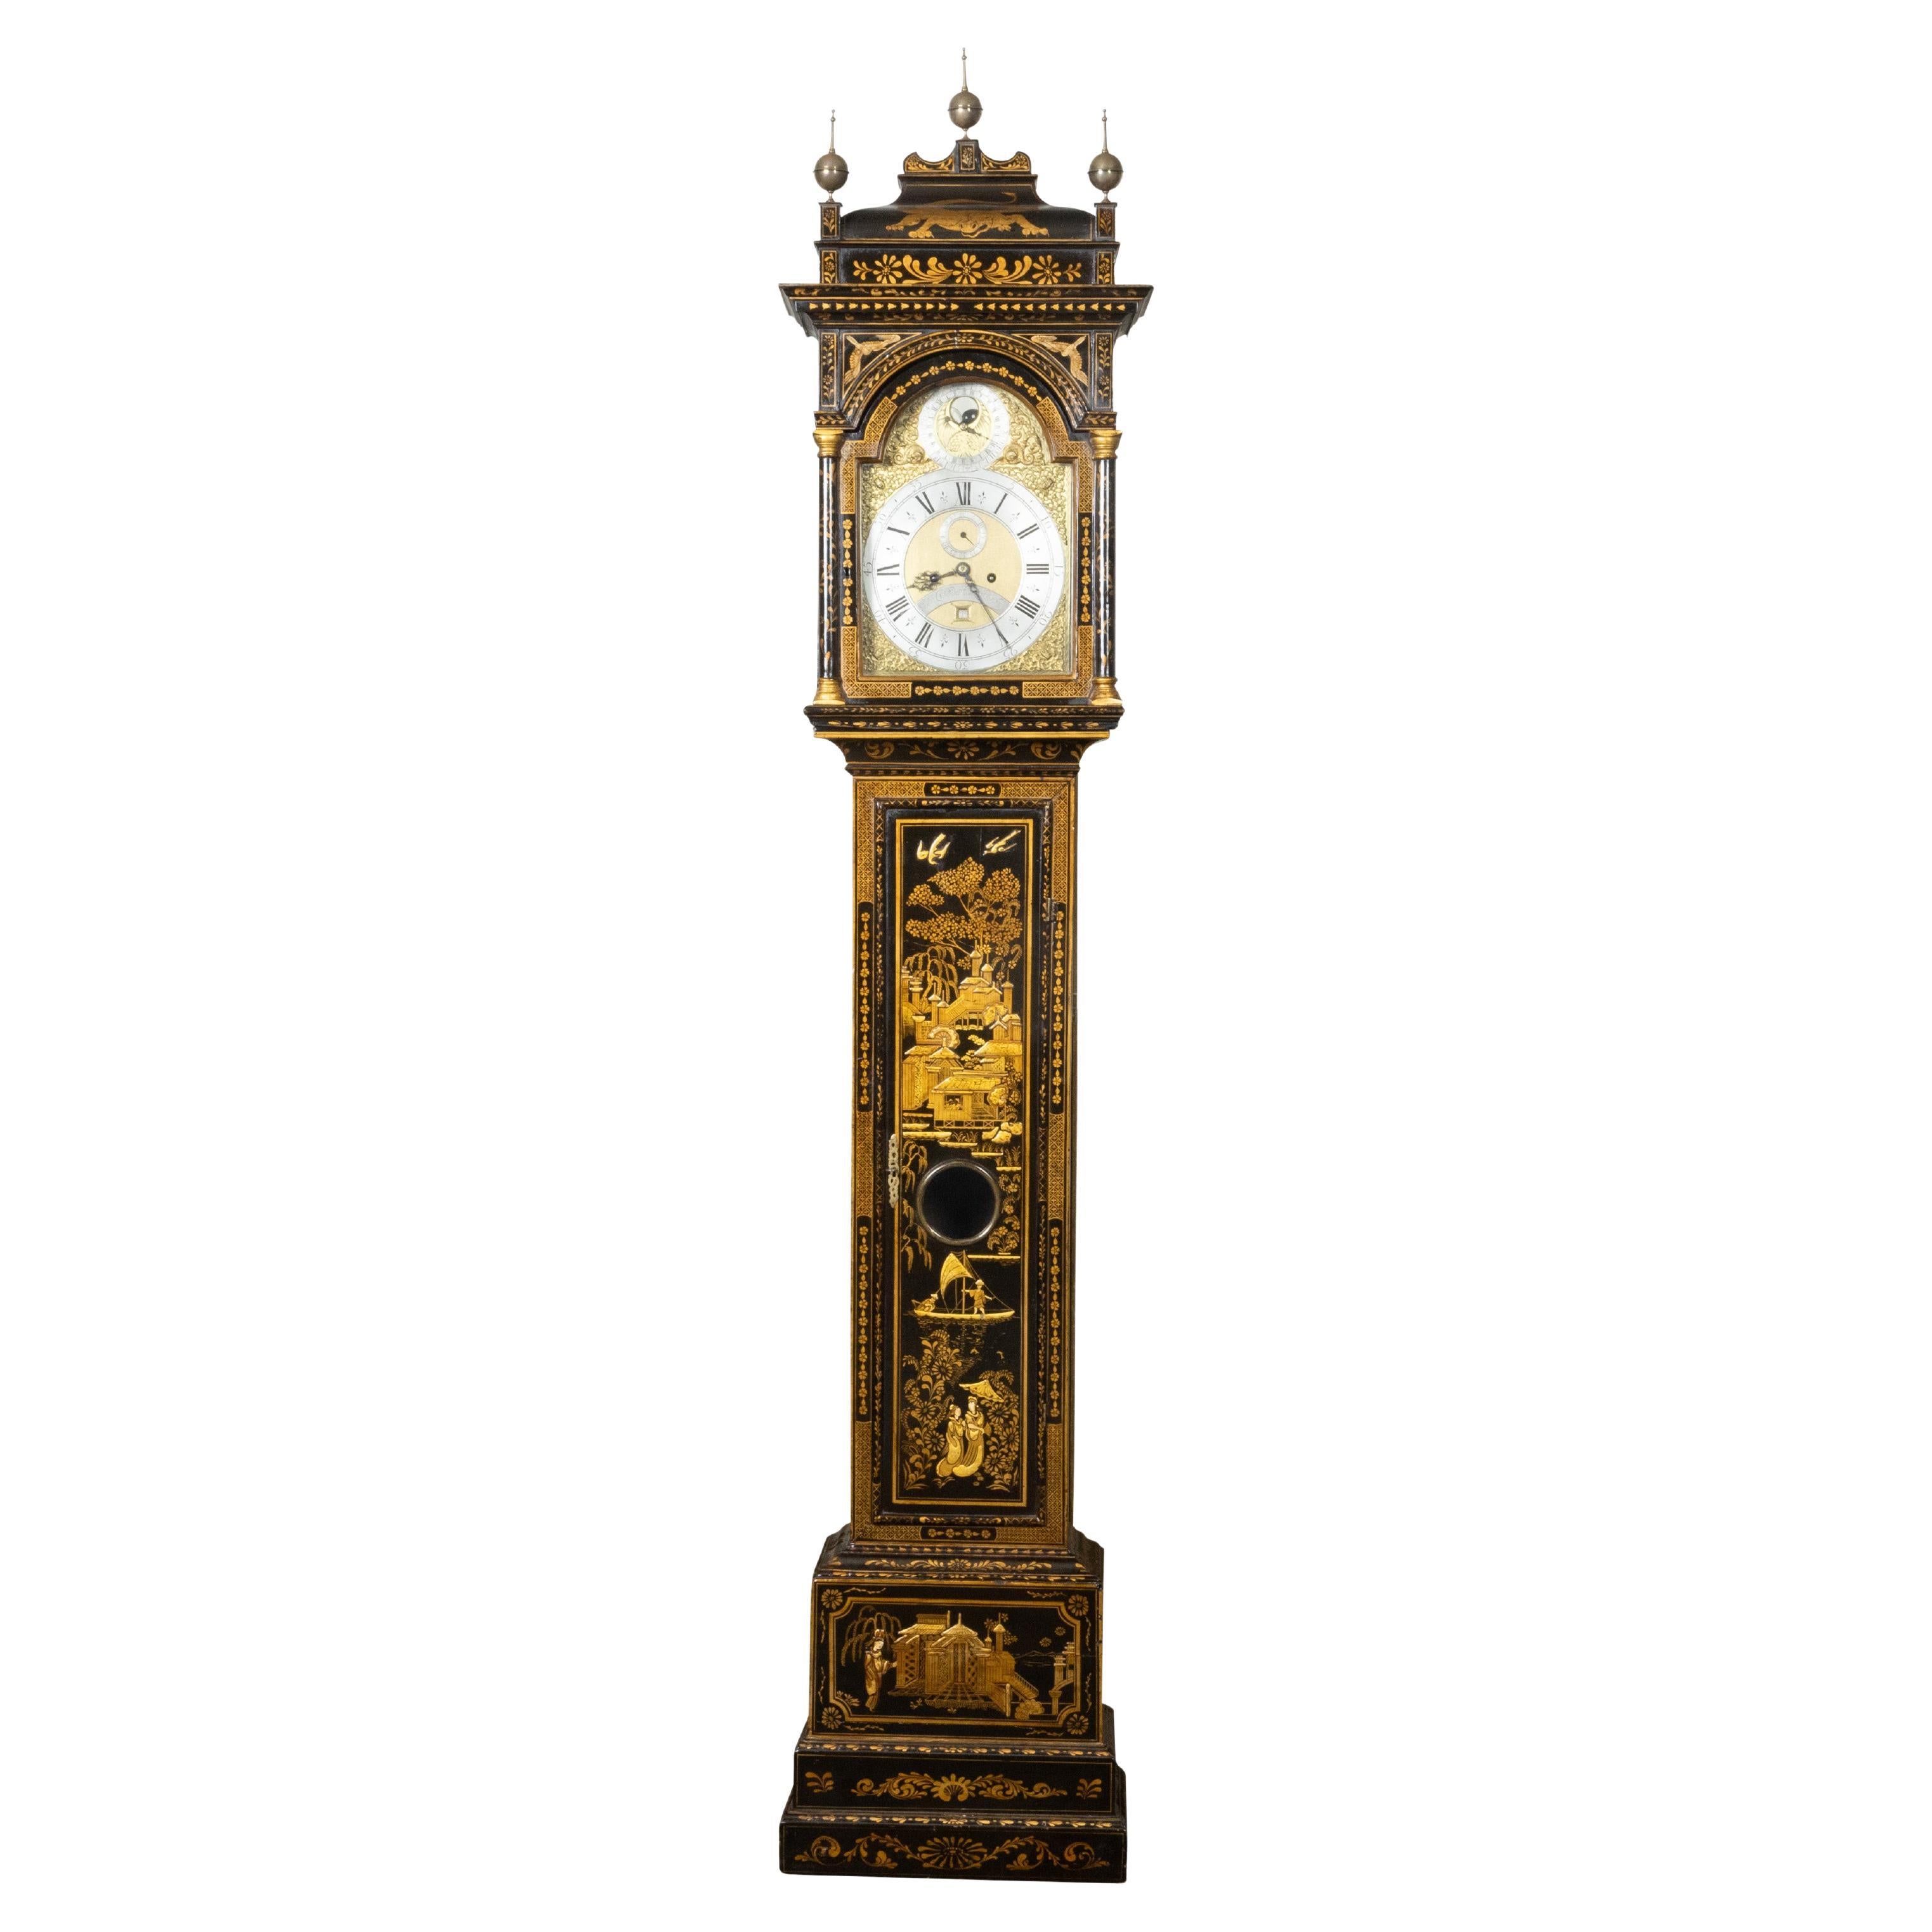 English George III 18th Century Japanned Tall Case Clock with Chinoiserie Décor